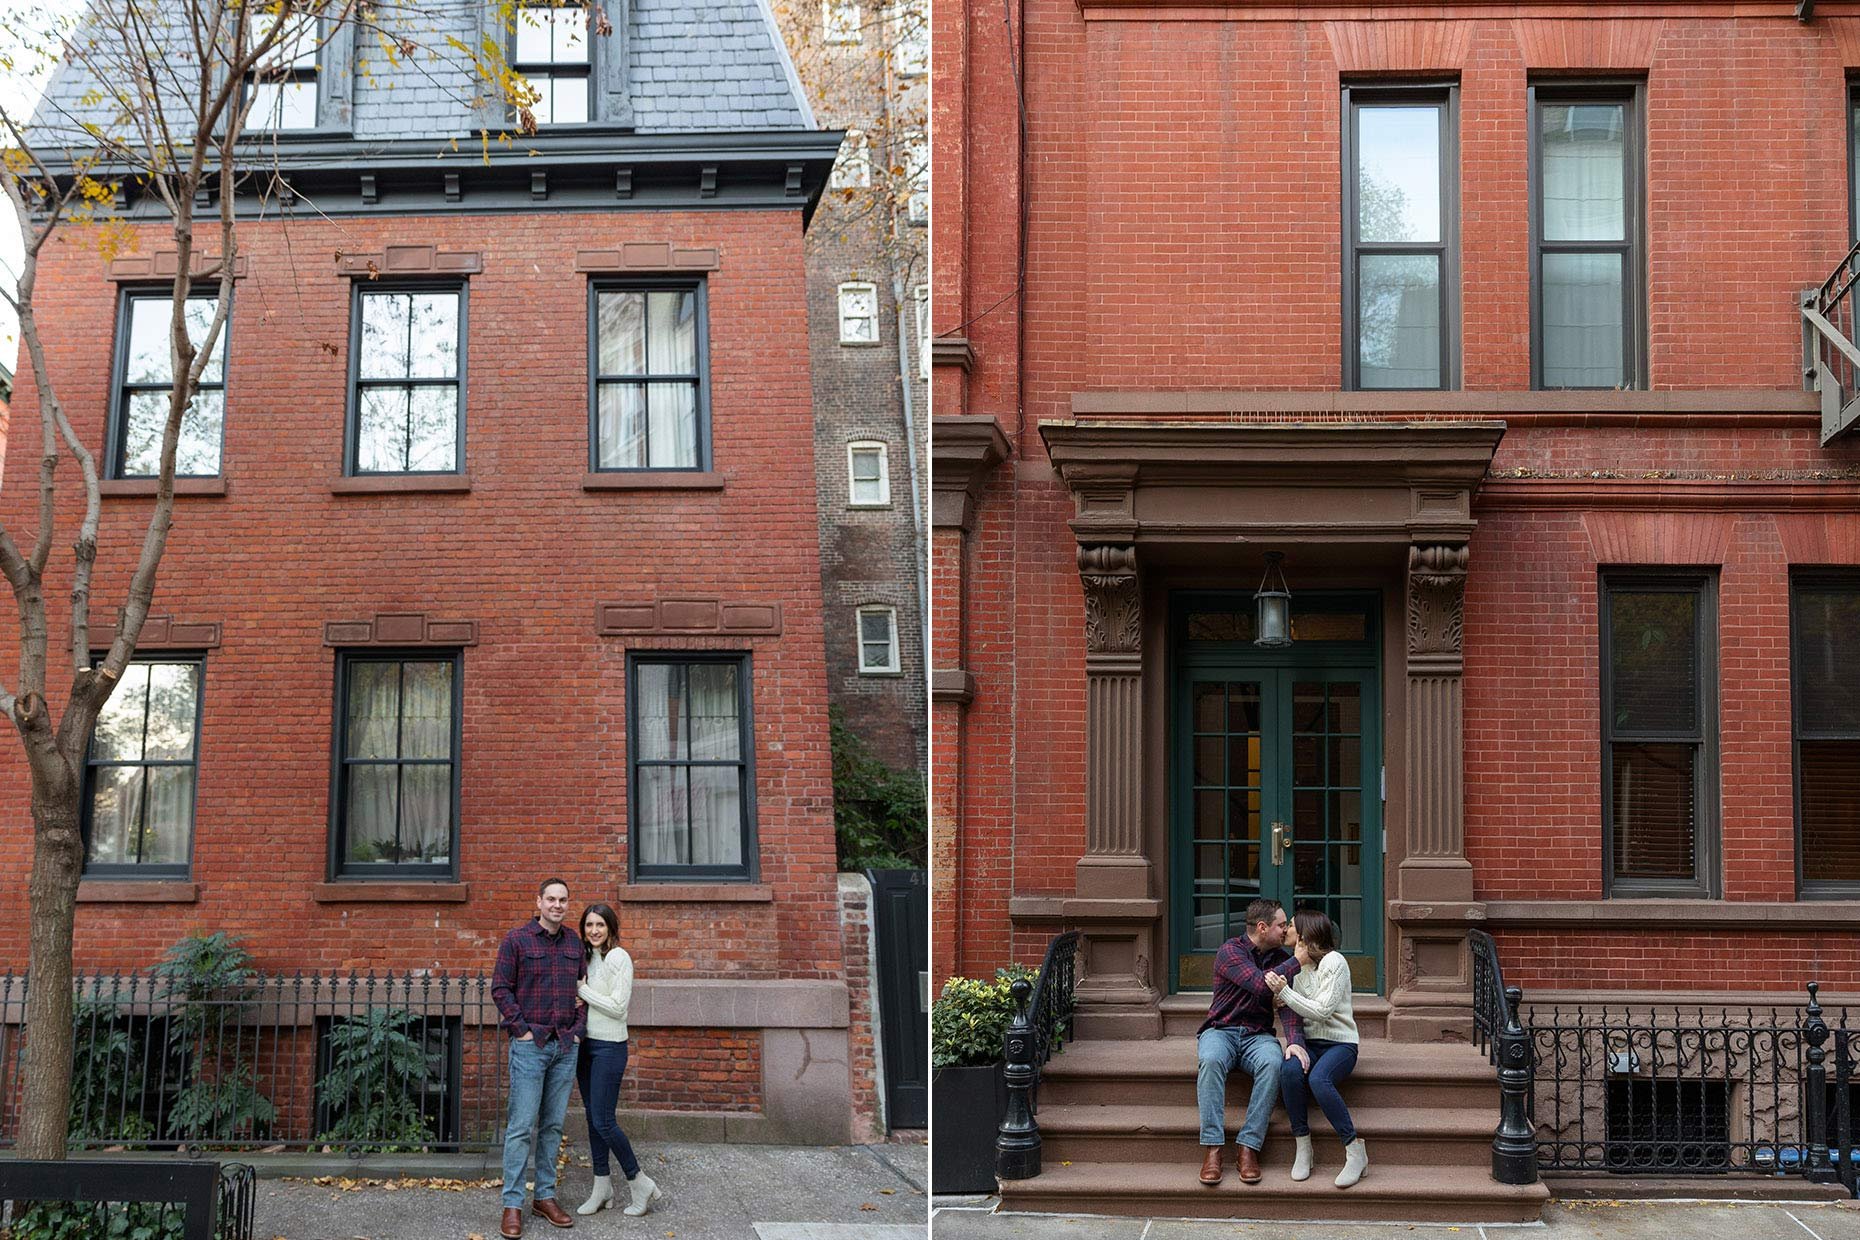 Brick Homes in Manhattan at Engagement Photo Session